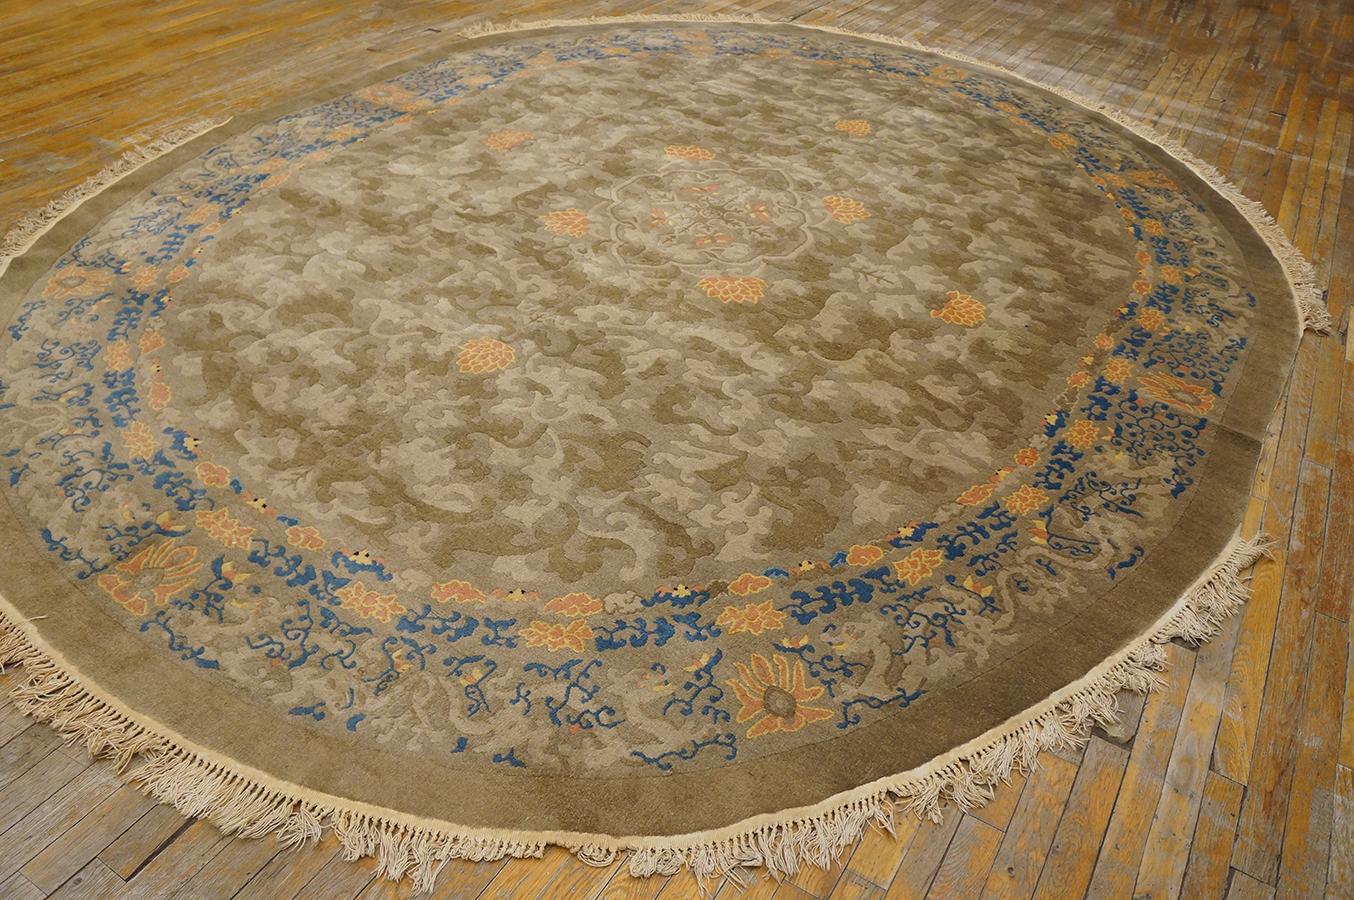 Hand-Knotted Late 19th Century Oval Chinese Perking Dragon Carpet ( 9' x 11' 8